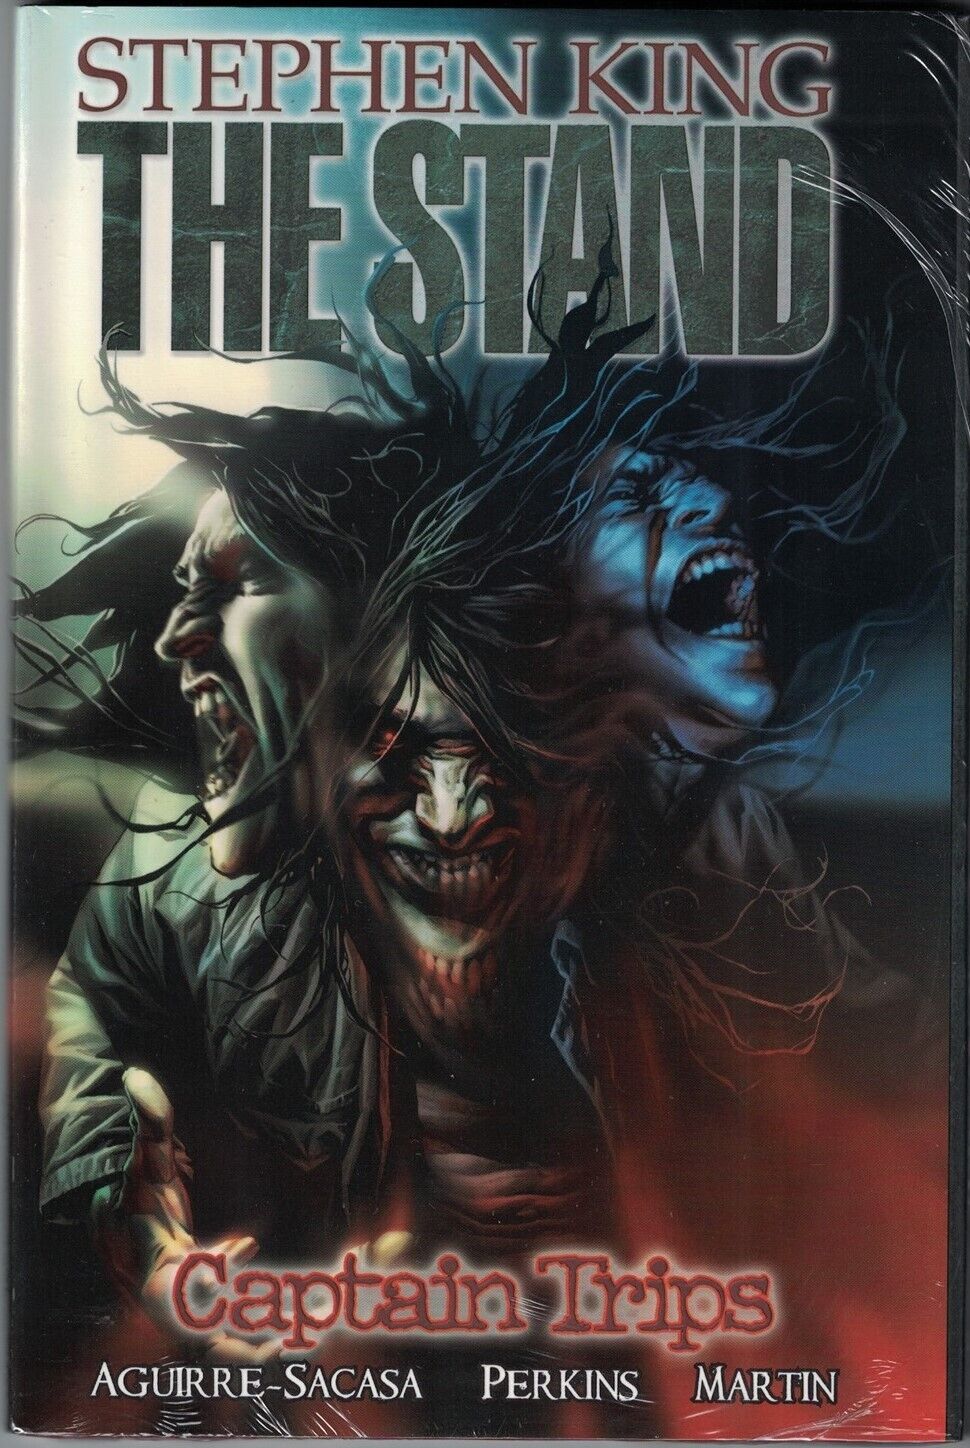 Stephen King STAND Vol 1 CAPTAIN TRIPS HC Hardcover Variant $24.99srp SEALED NM